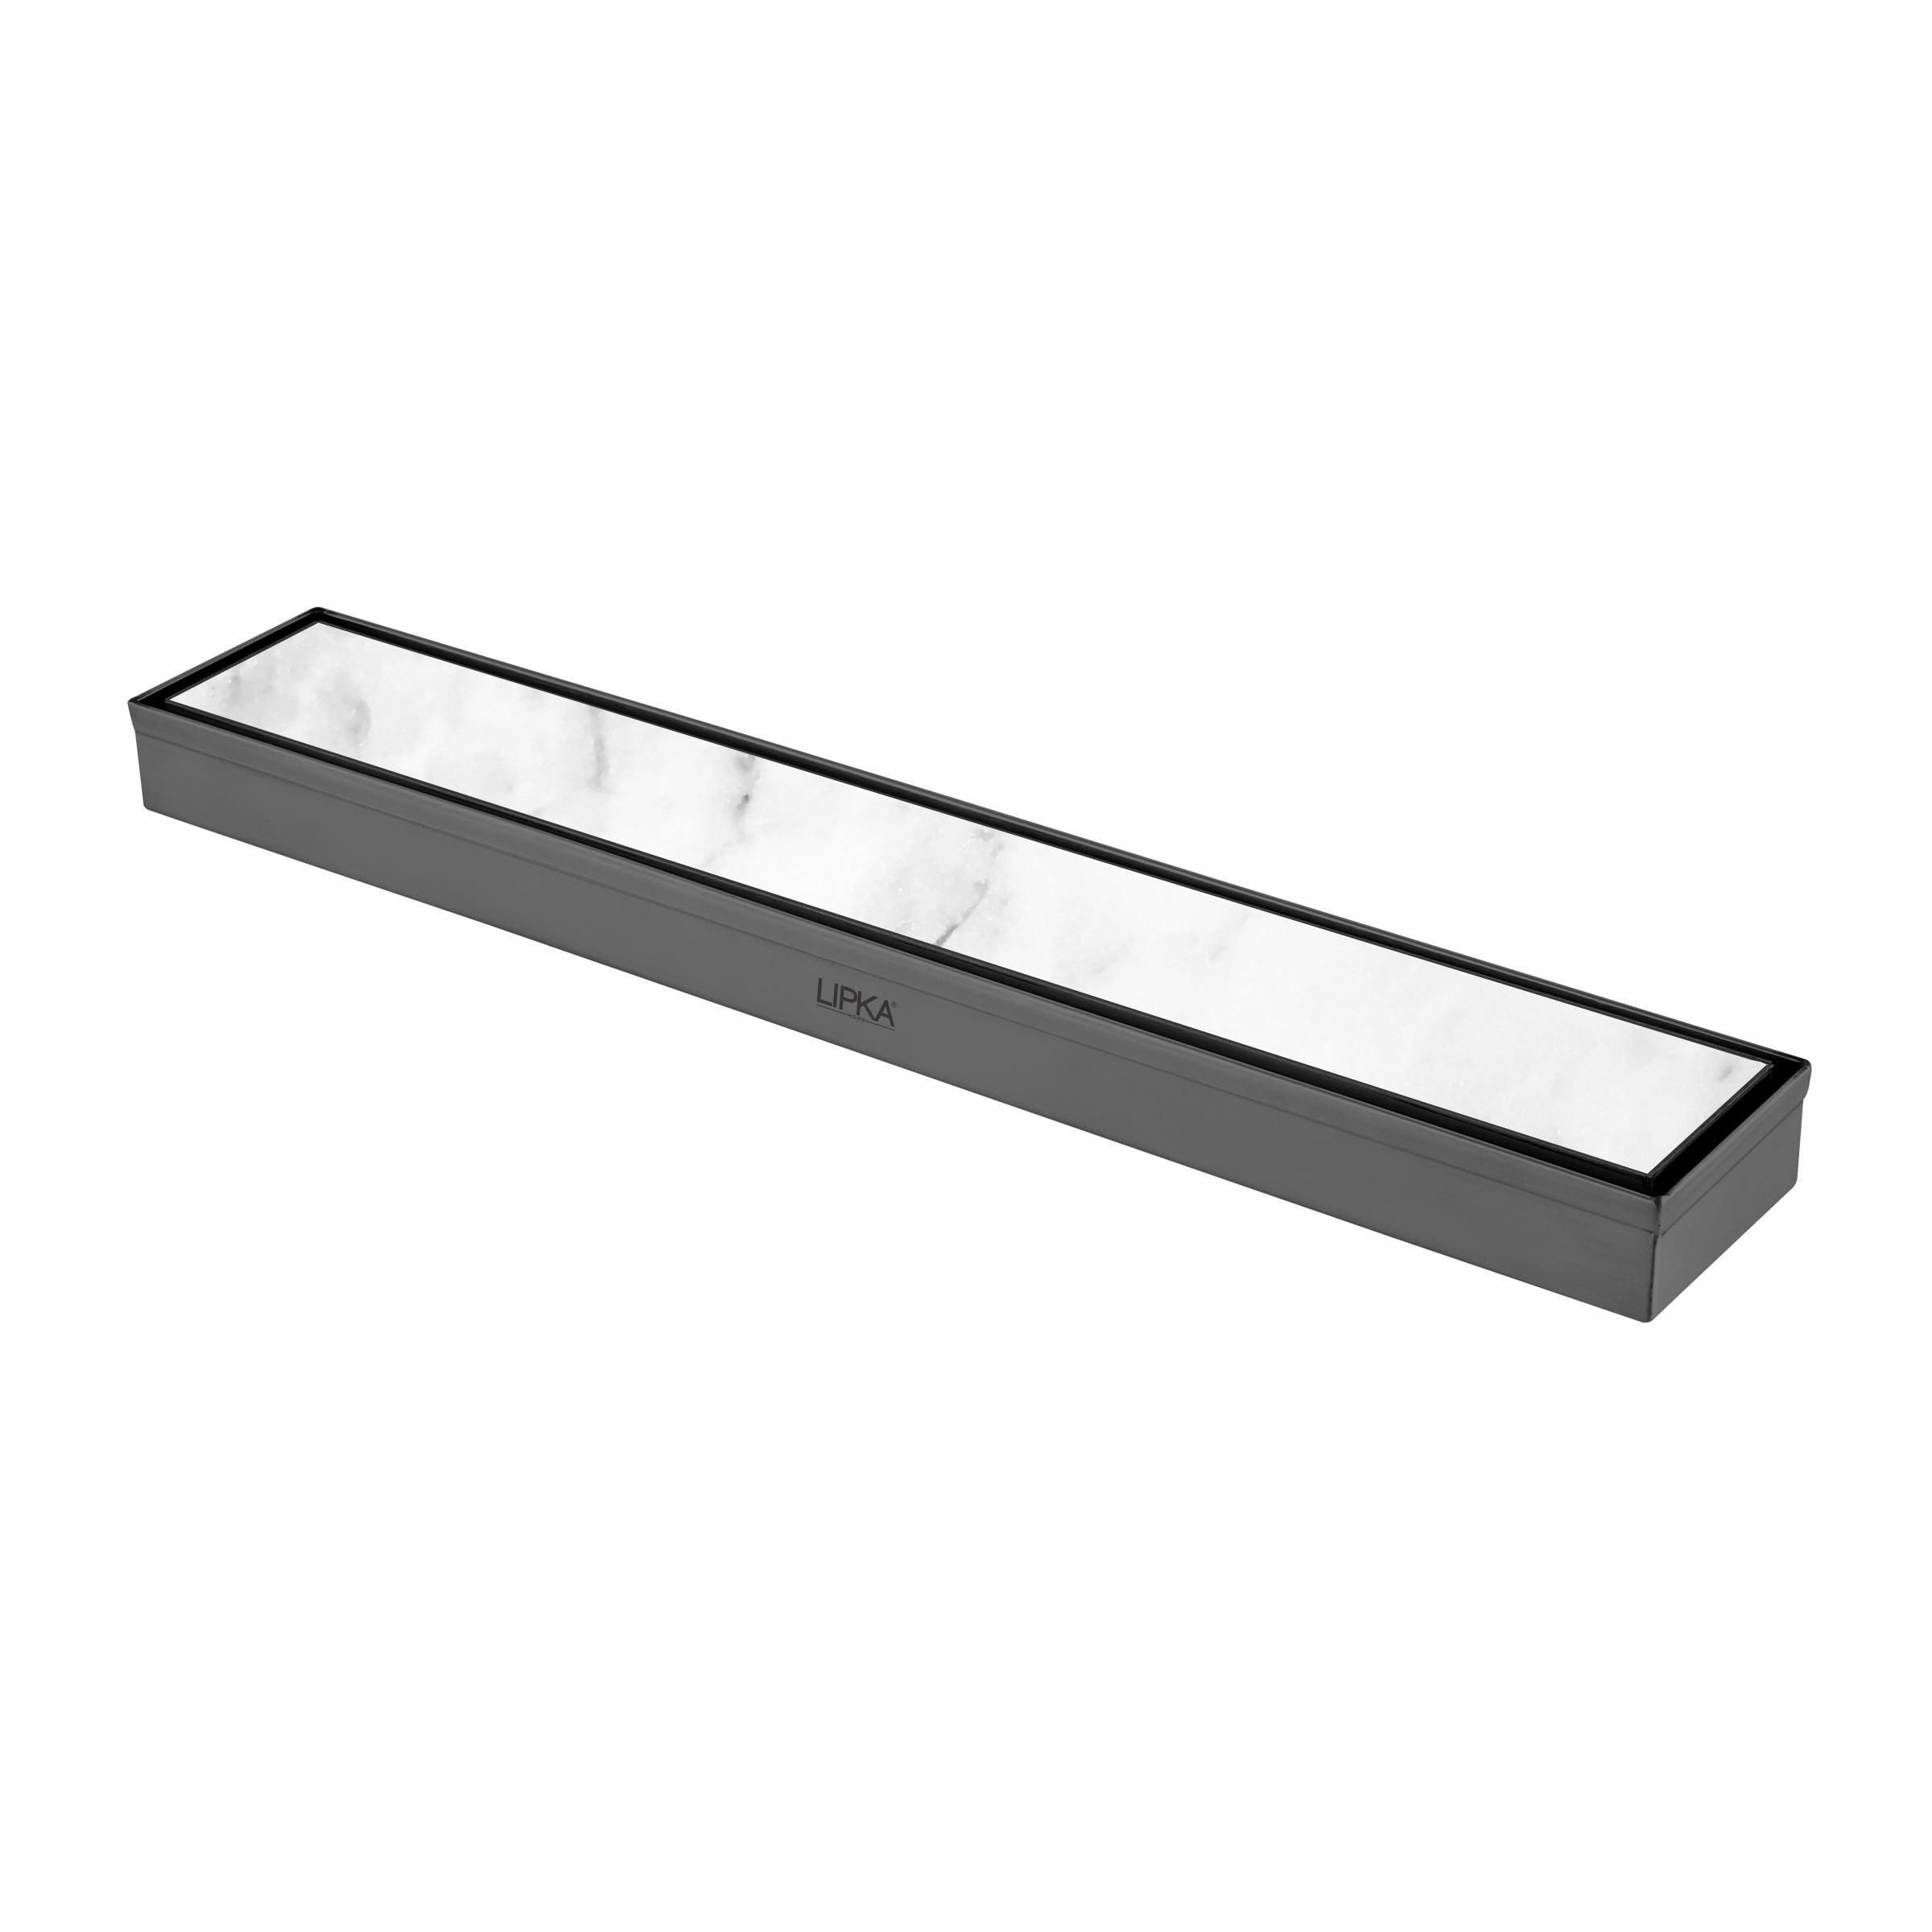 Marble Insert Shower Drain Channel - Black (18 x 2 Inches)